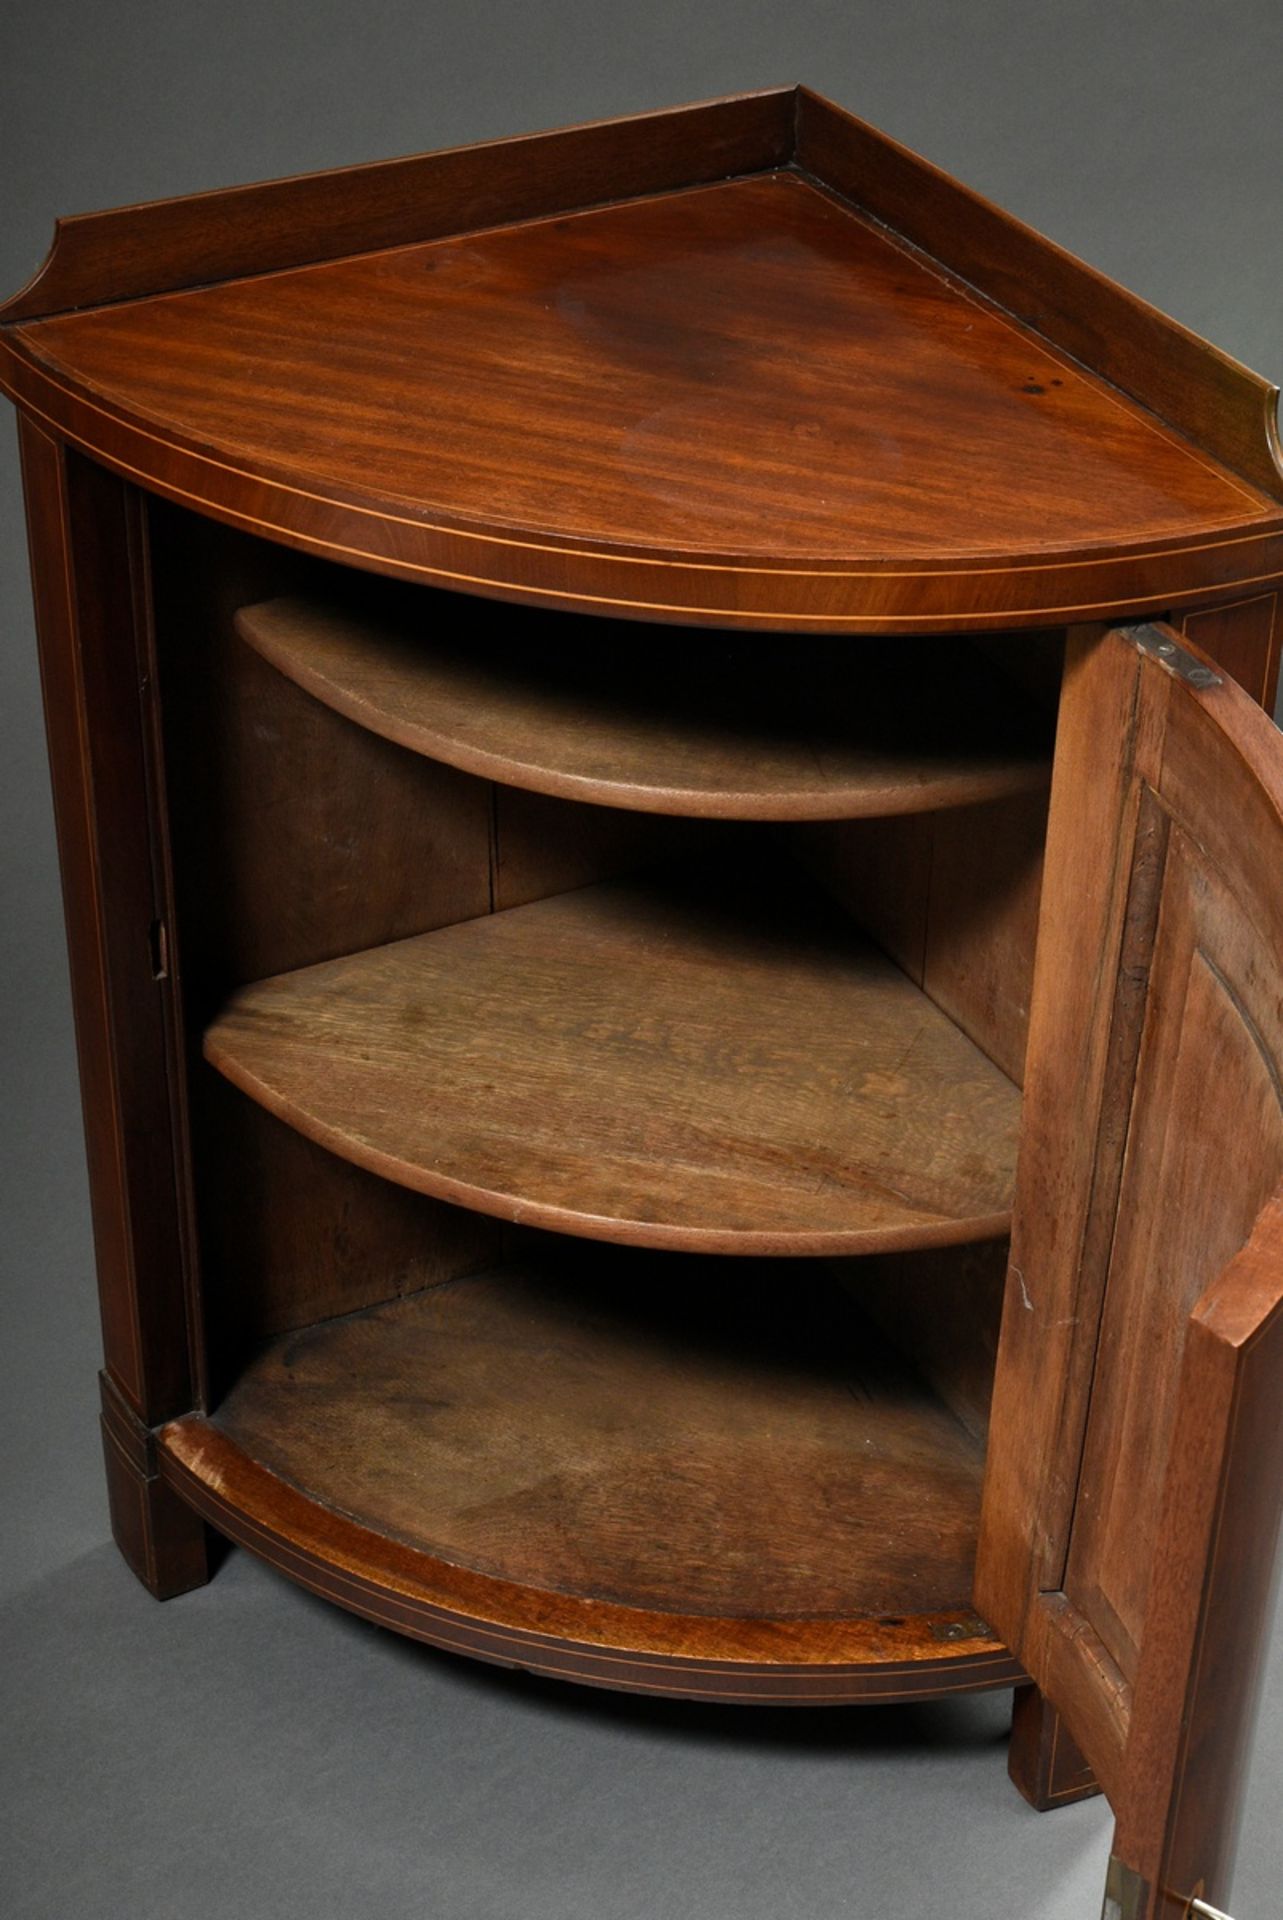 Small corner cupboard with rounded front, mahogany veneer with light inlays, England c. 1900, 82x62 - Image 4 of 5